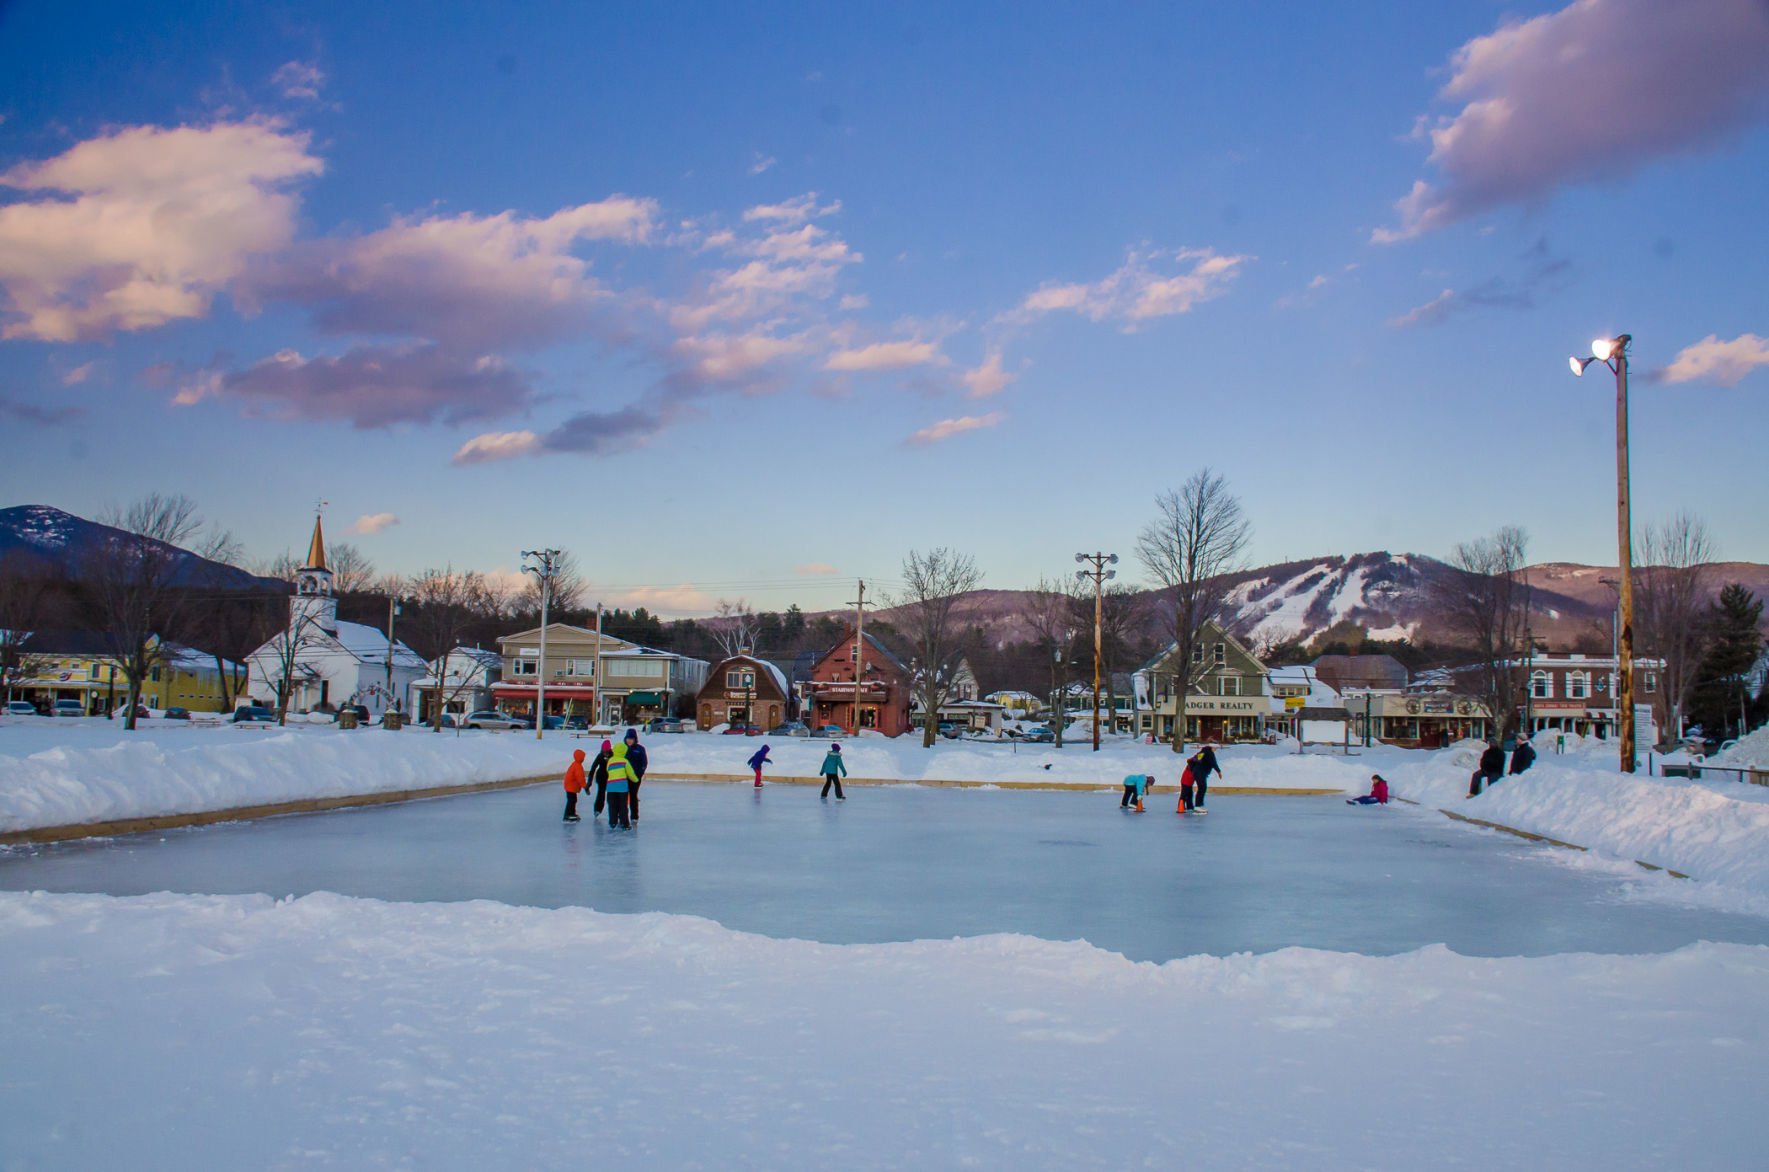 North Conway named one of the best ski towns in U.S. | Travel